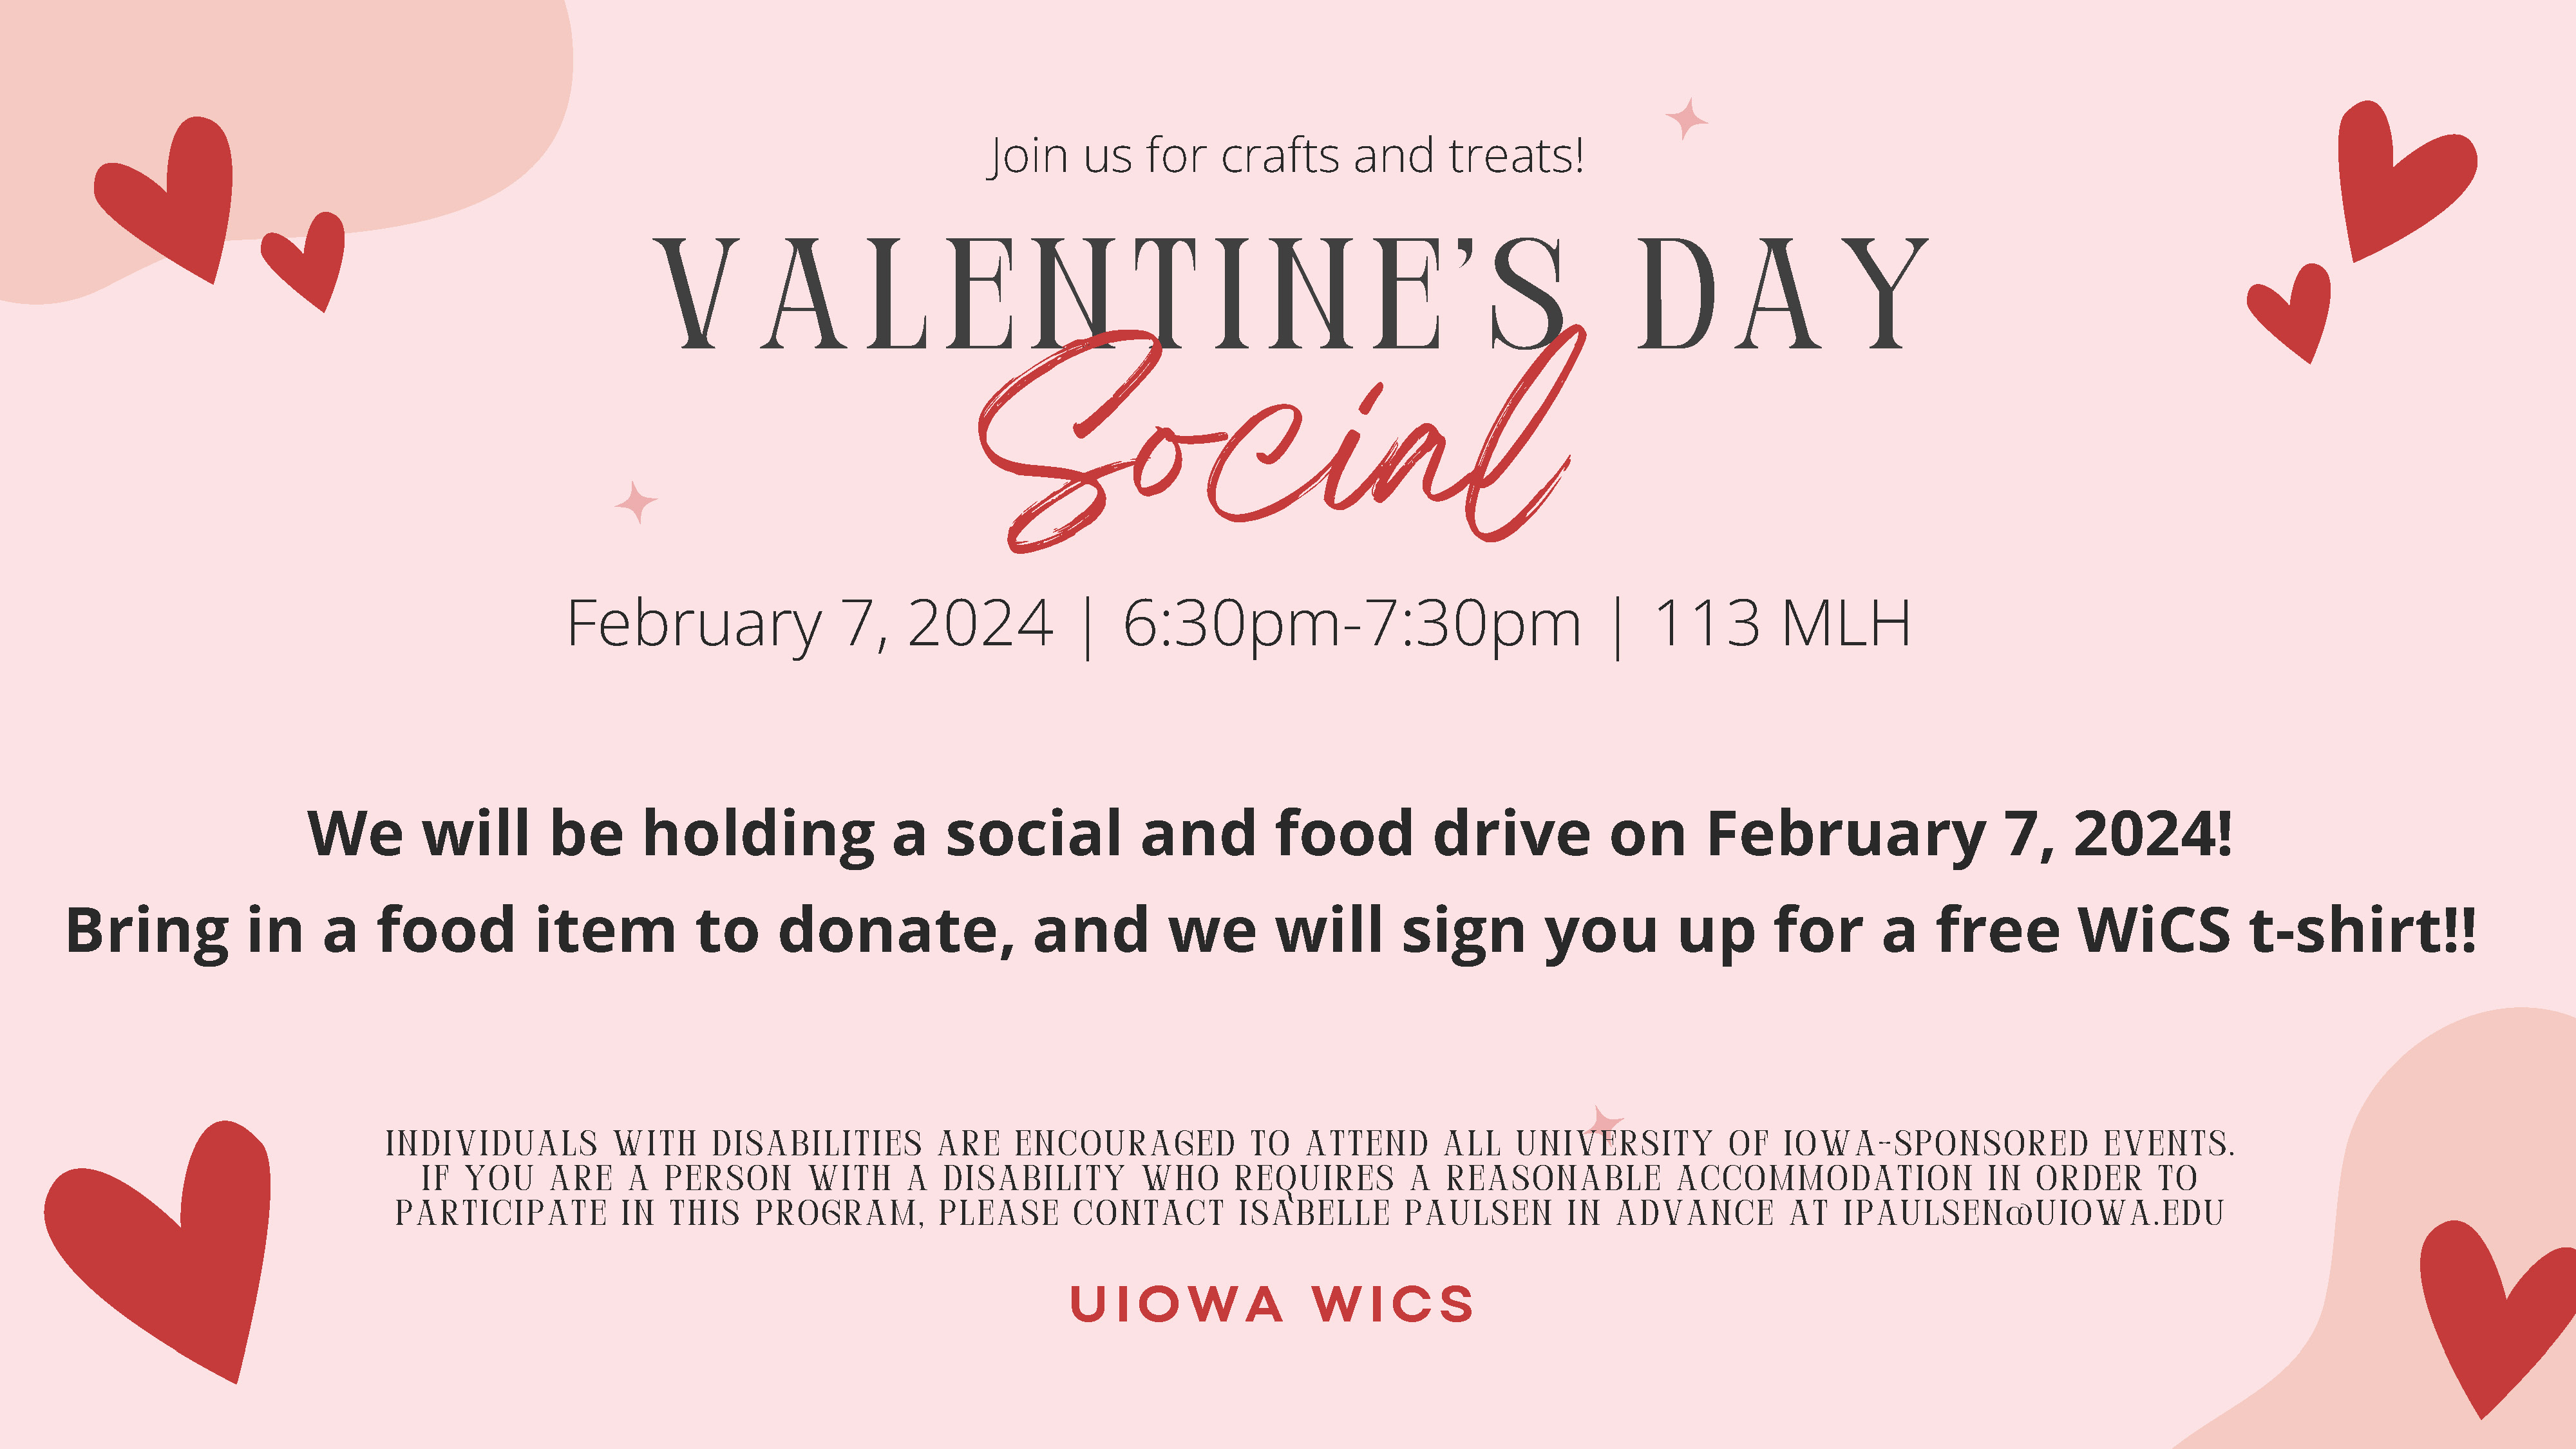 VALENTINE'S DAY Social UIOWA WICS We will be holding a social and food drive on February 7, 2024! Bring in a food item to donate, and we will sign you up for a free WiCS t-shirt!! February 7, 2024 | 6:30pm-7:30pm | 113 MLH INDIVIDUALS WITH DISABILITIES AR